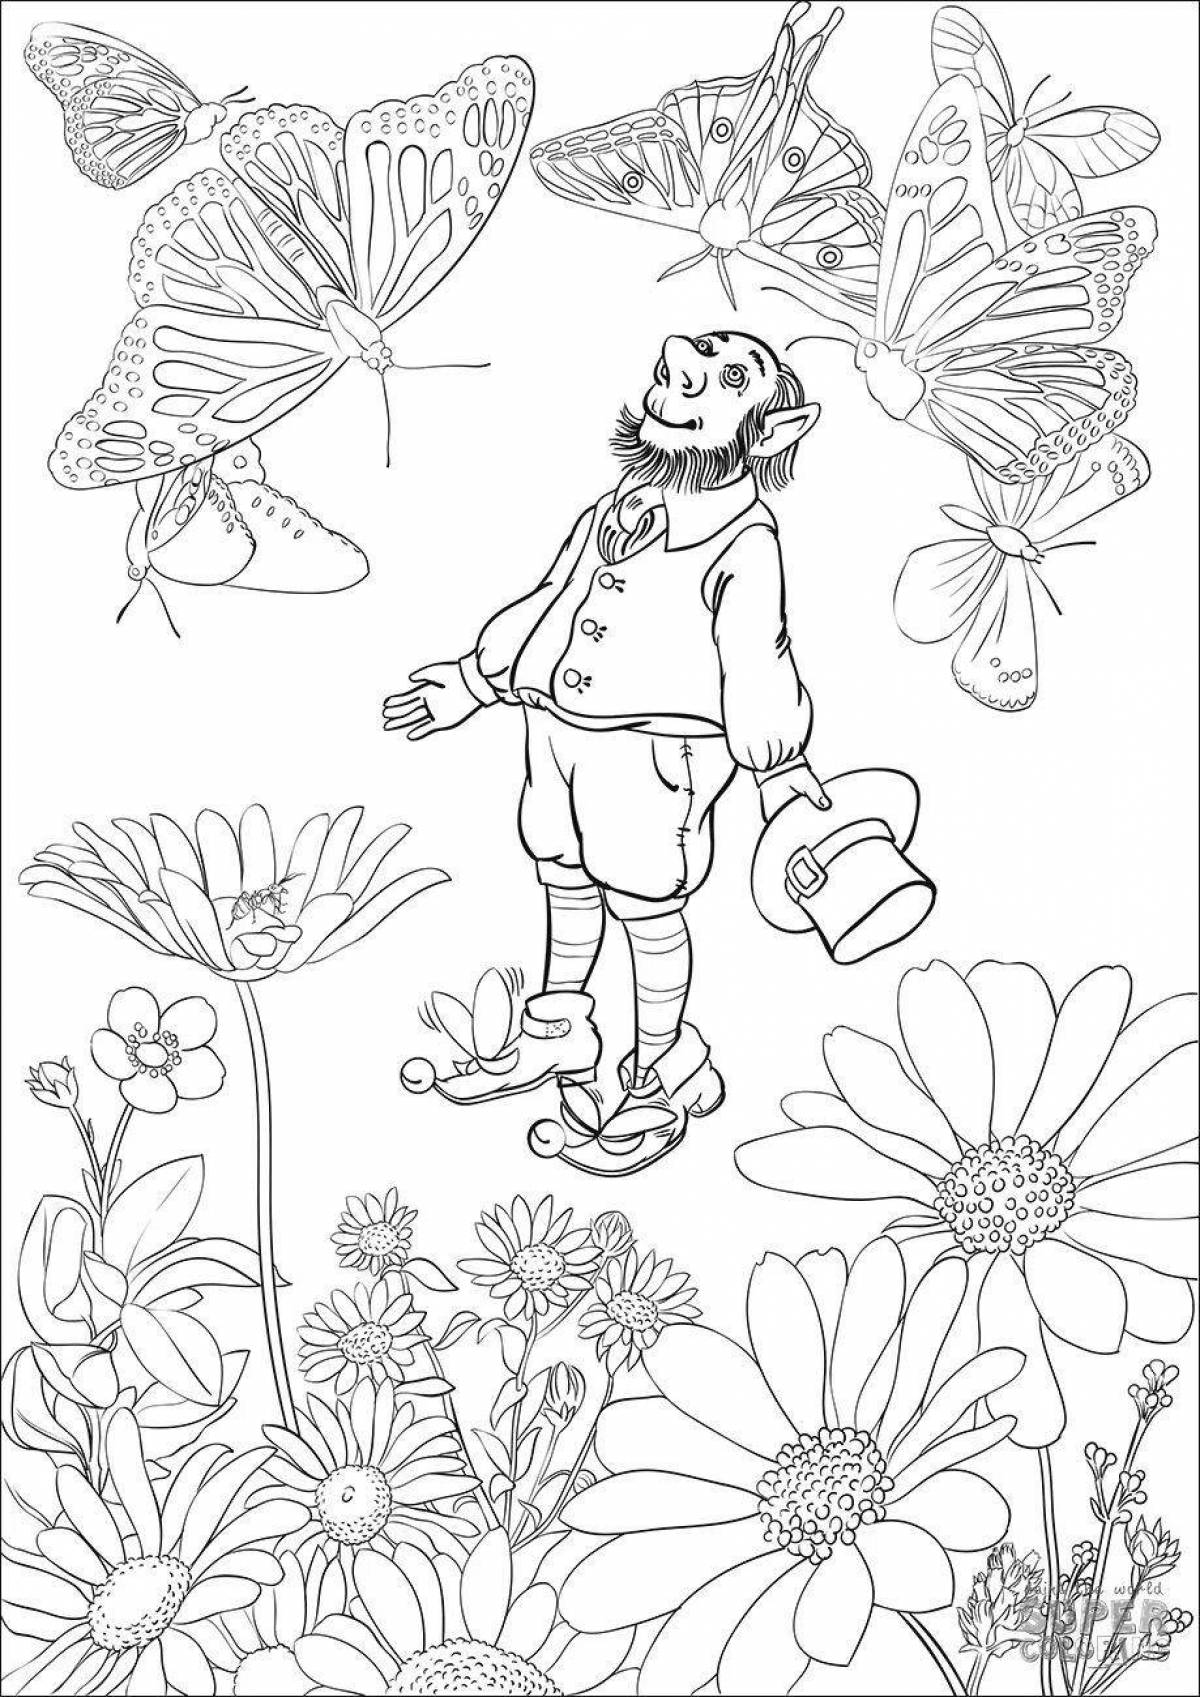 Coloring page charming flute and jug